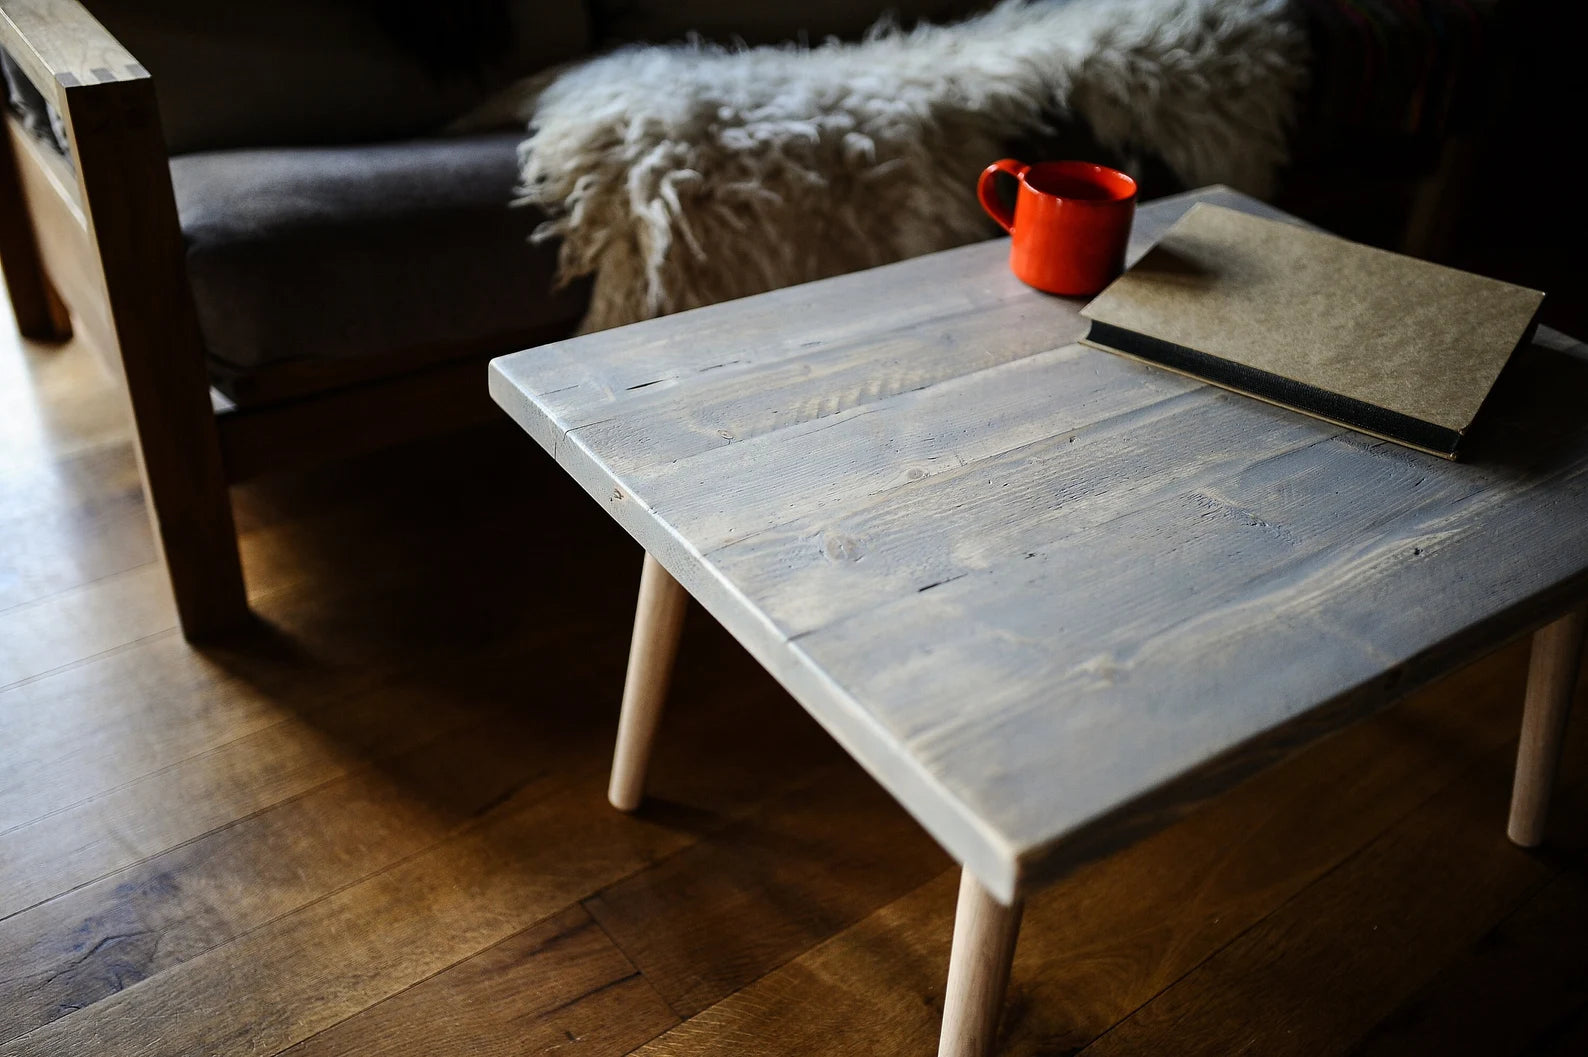 Coffee tables vs. bedside tables: what's the difference?